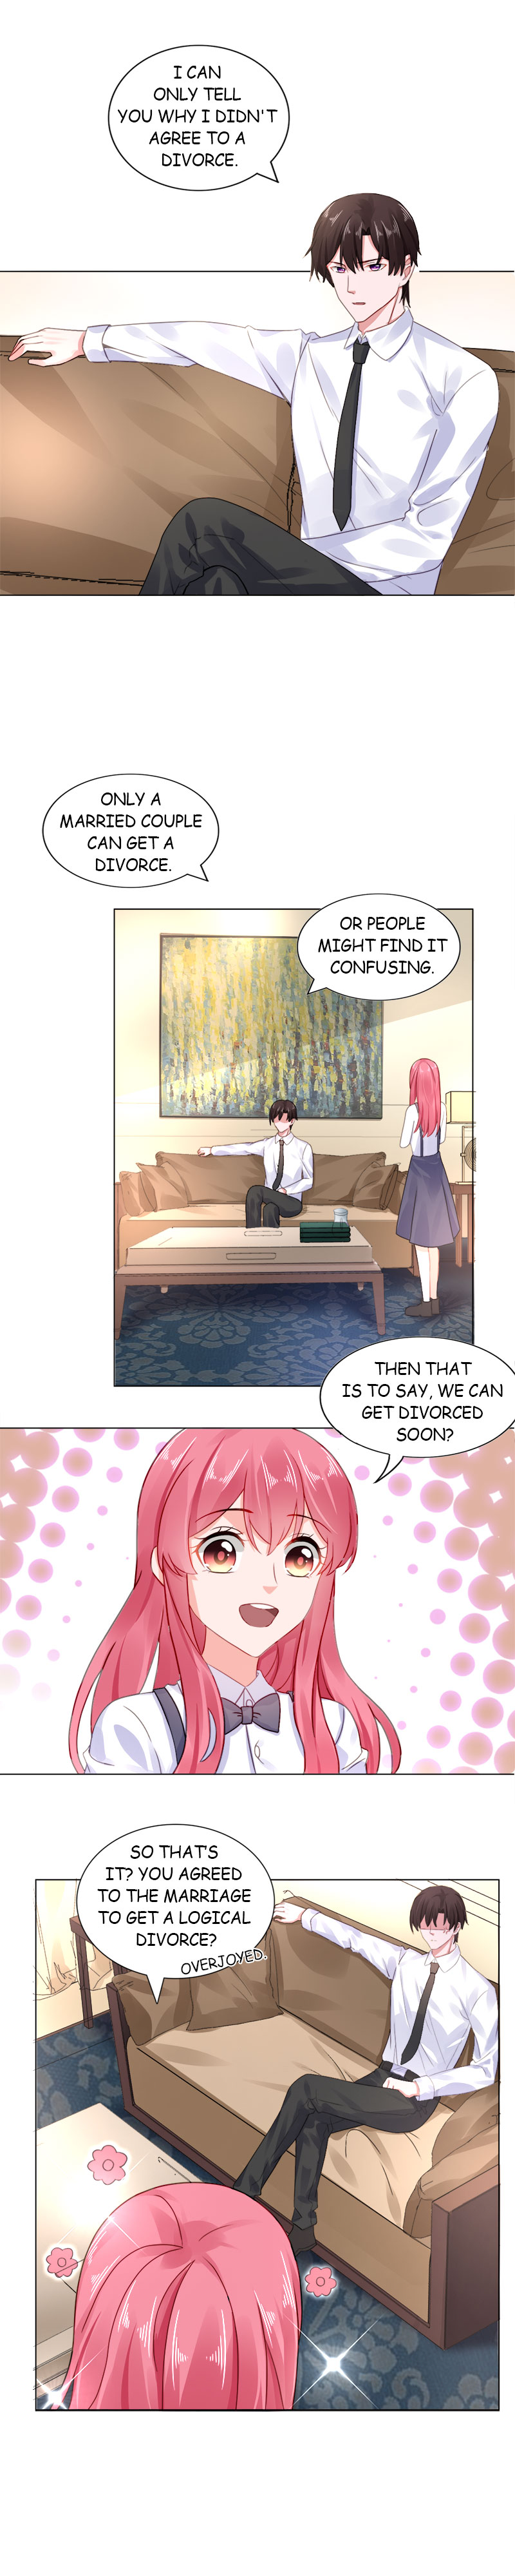 A Doting Marriage Dropped From The Clouds - Page 2